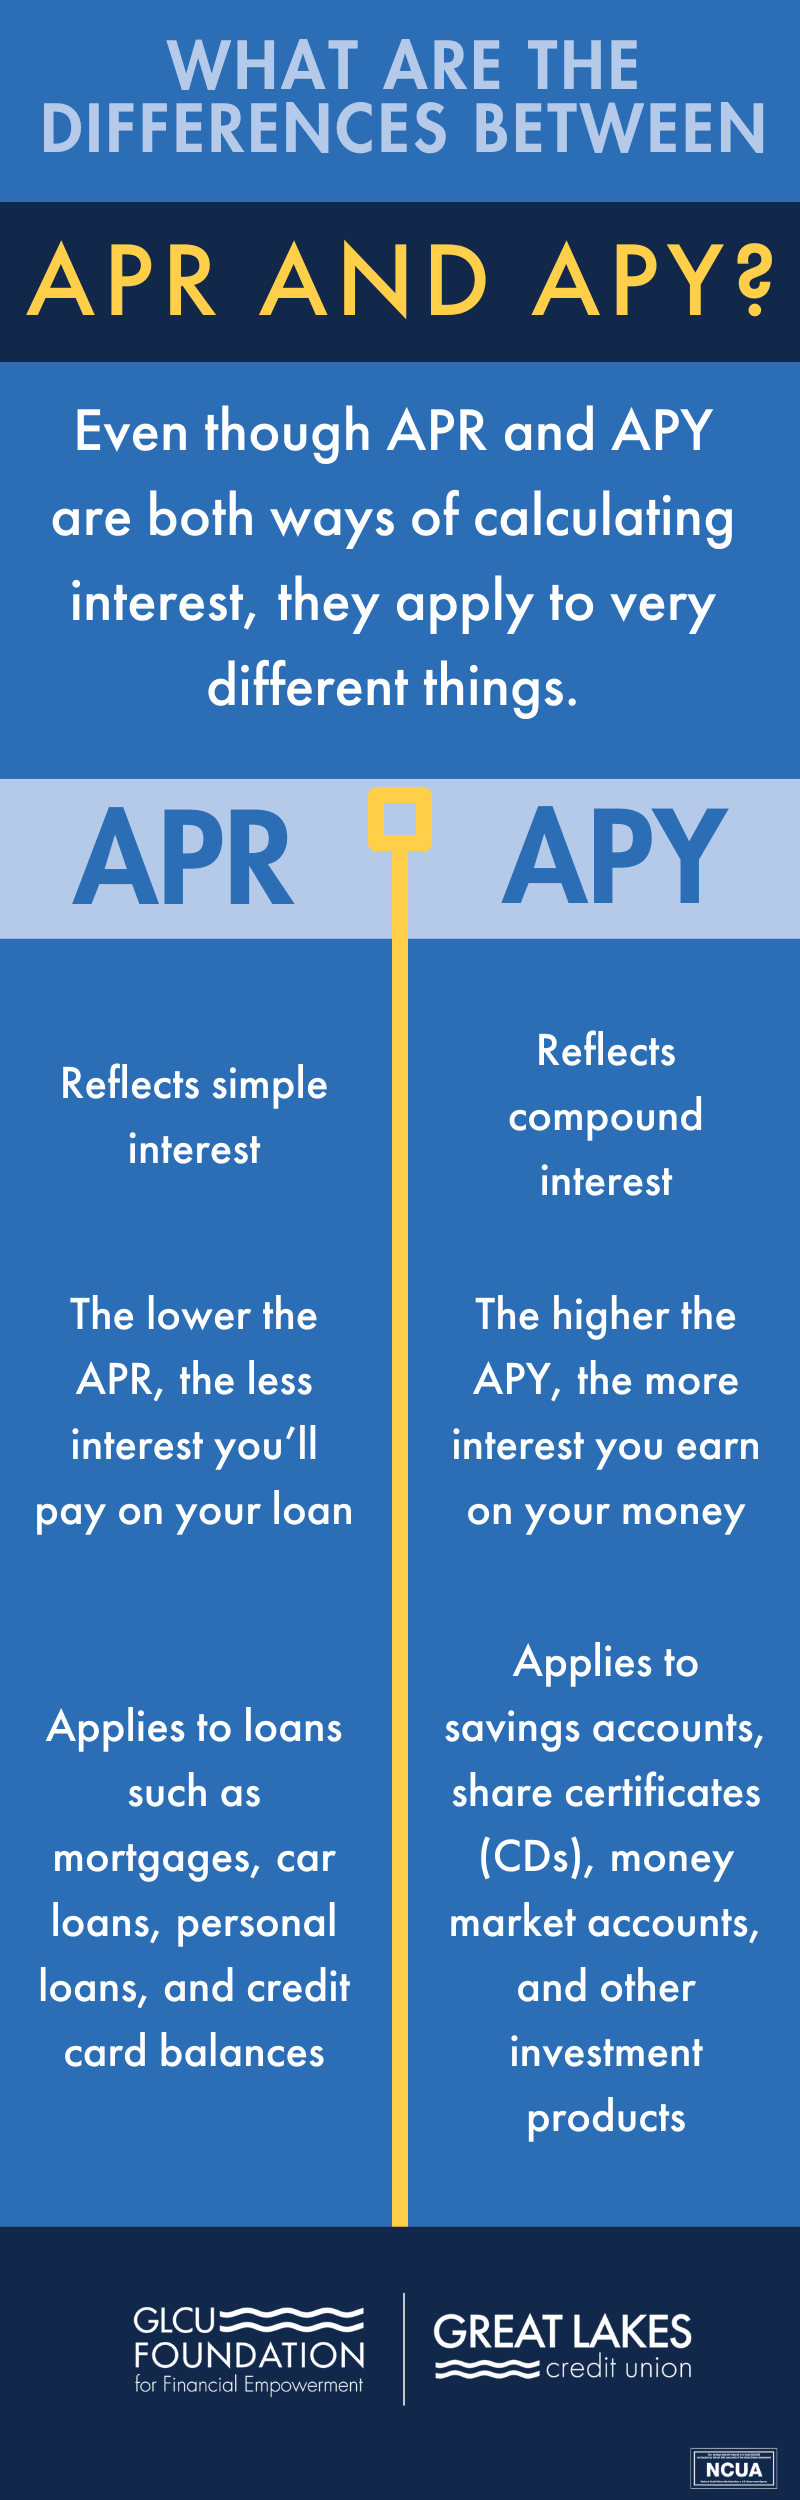 APY Infographic